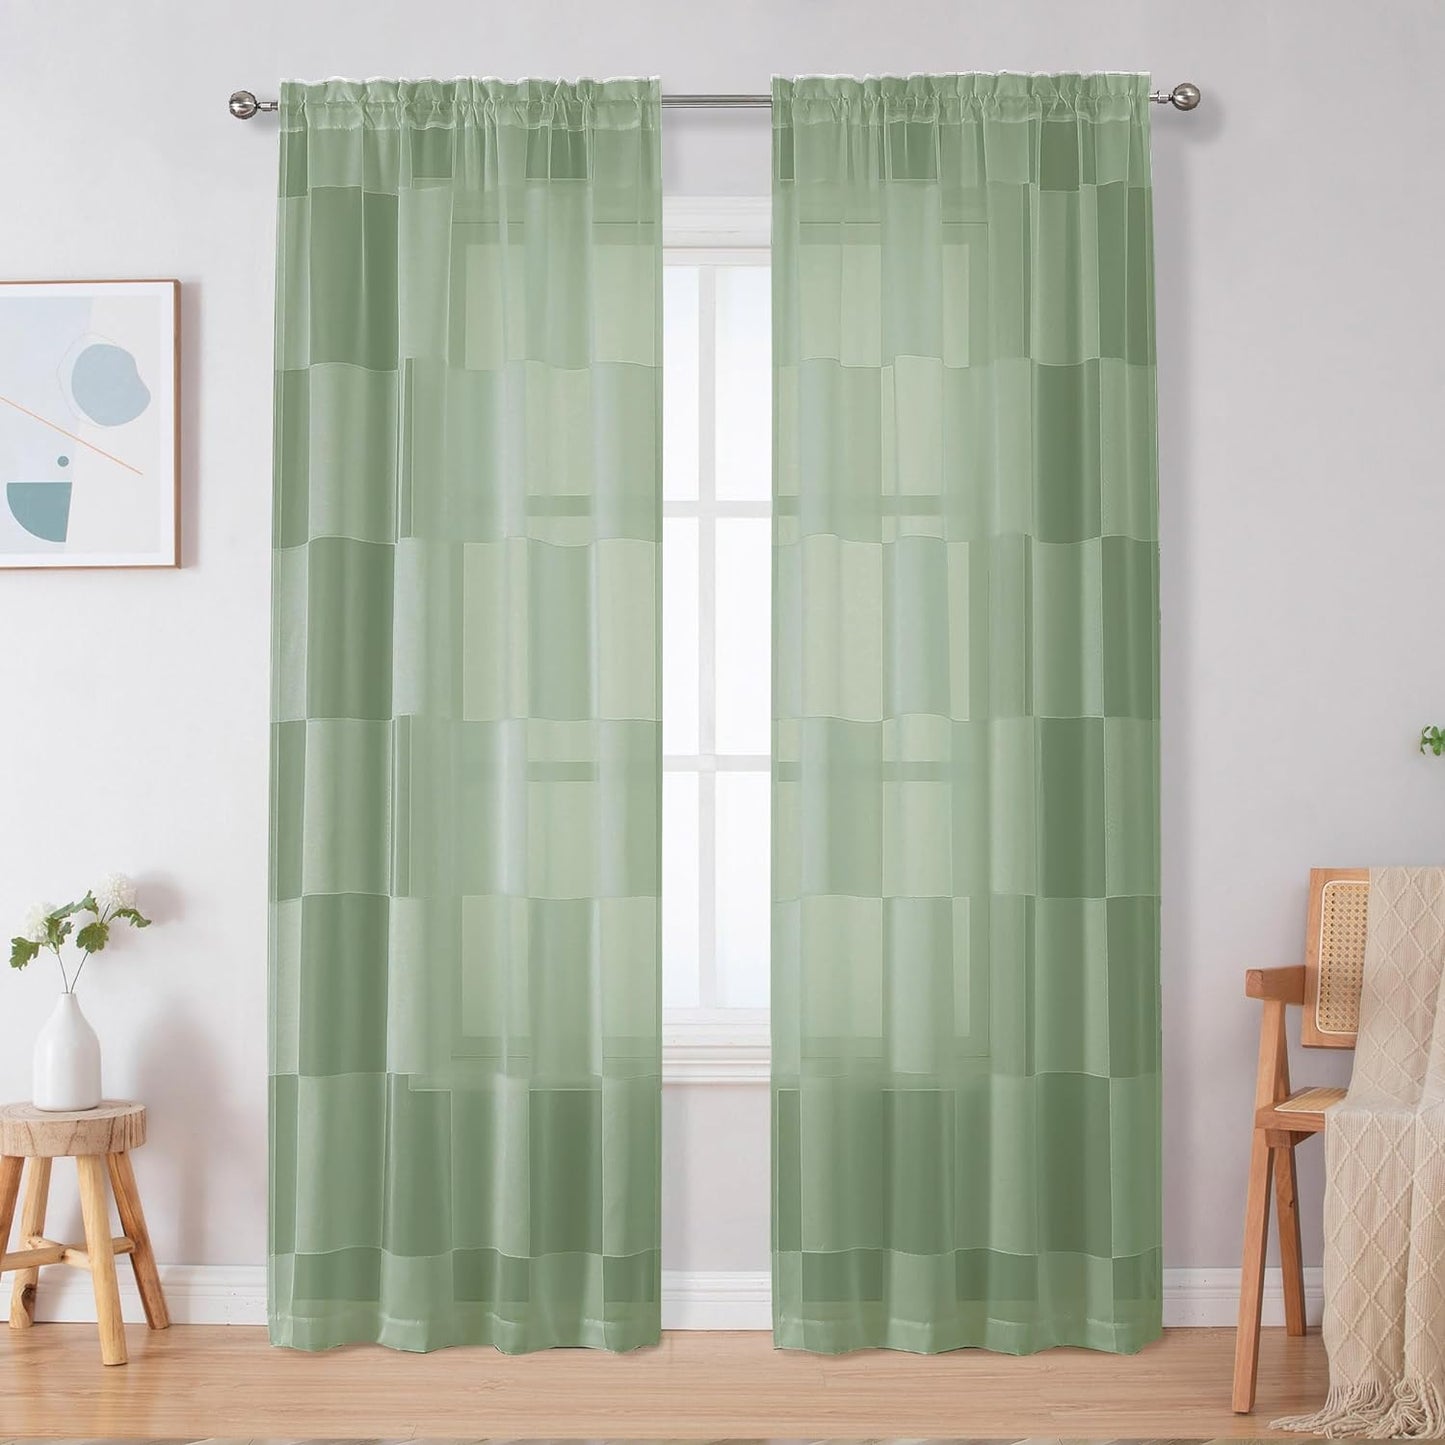 OVZME Sage Green Sheer Bedroom Curtains 84 Inch Length 2 Panels Set, Dual Rod Pocket Clip Checkered Window Curtains for Living Room, Light Filtering & Privacy Sheer Green Drapes, Each 42W X 84L  OVZME Sage Green 42W X 96L 